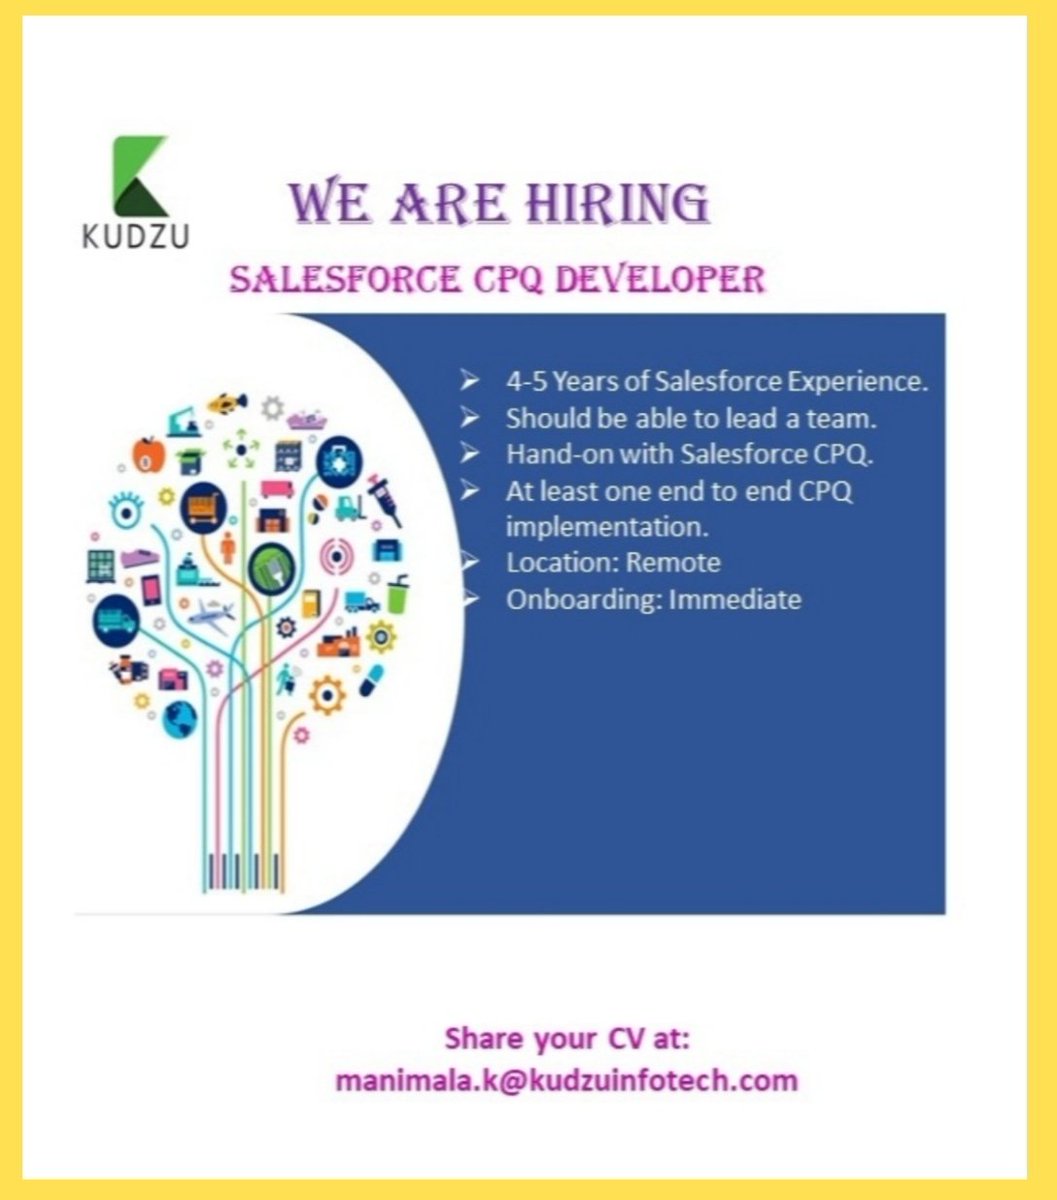 Hello Folks,
Greetings from #Kudzuinfotech

We are actively #hiring for below open position.
Interested ?:- Plz shoot your updated CV at manimala.k@kudzuinfotech.com

#Kudzu #hiring #Salesforce #CPQ #Developer #immediatehiring